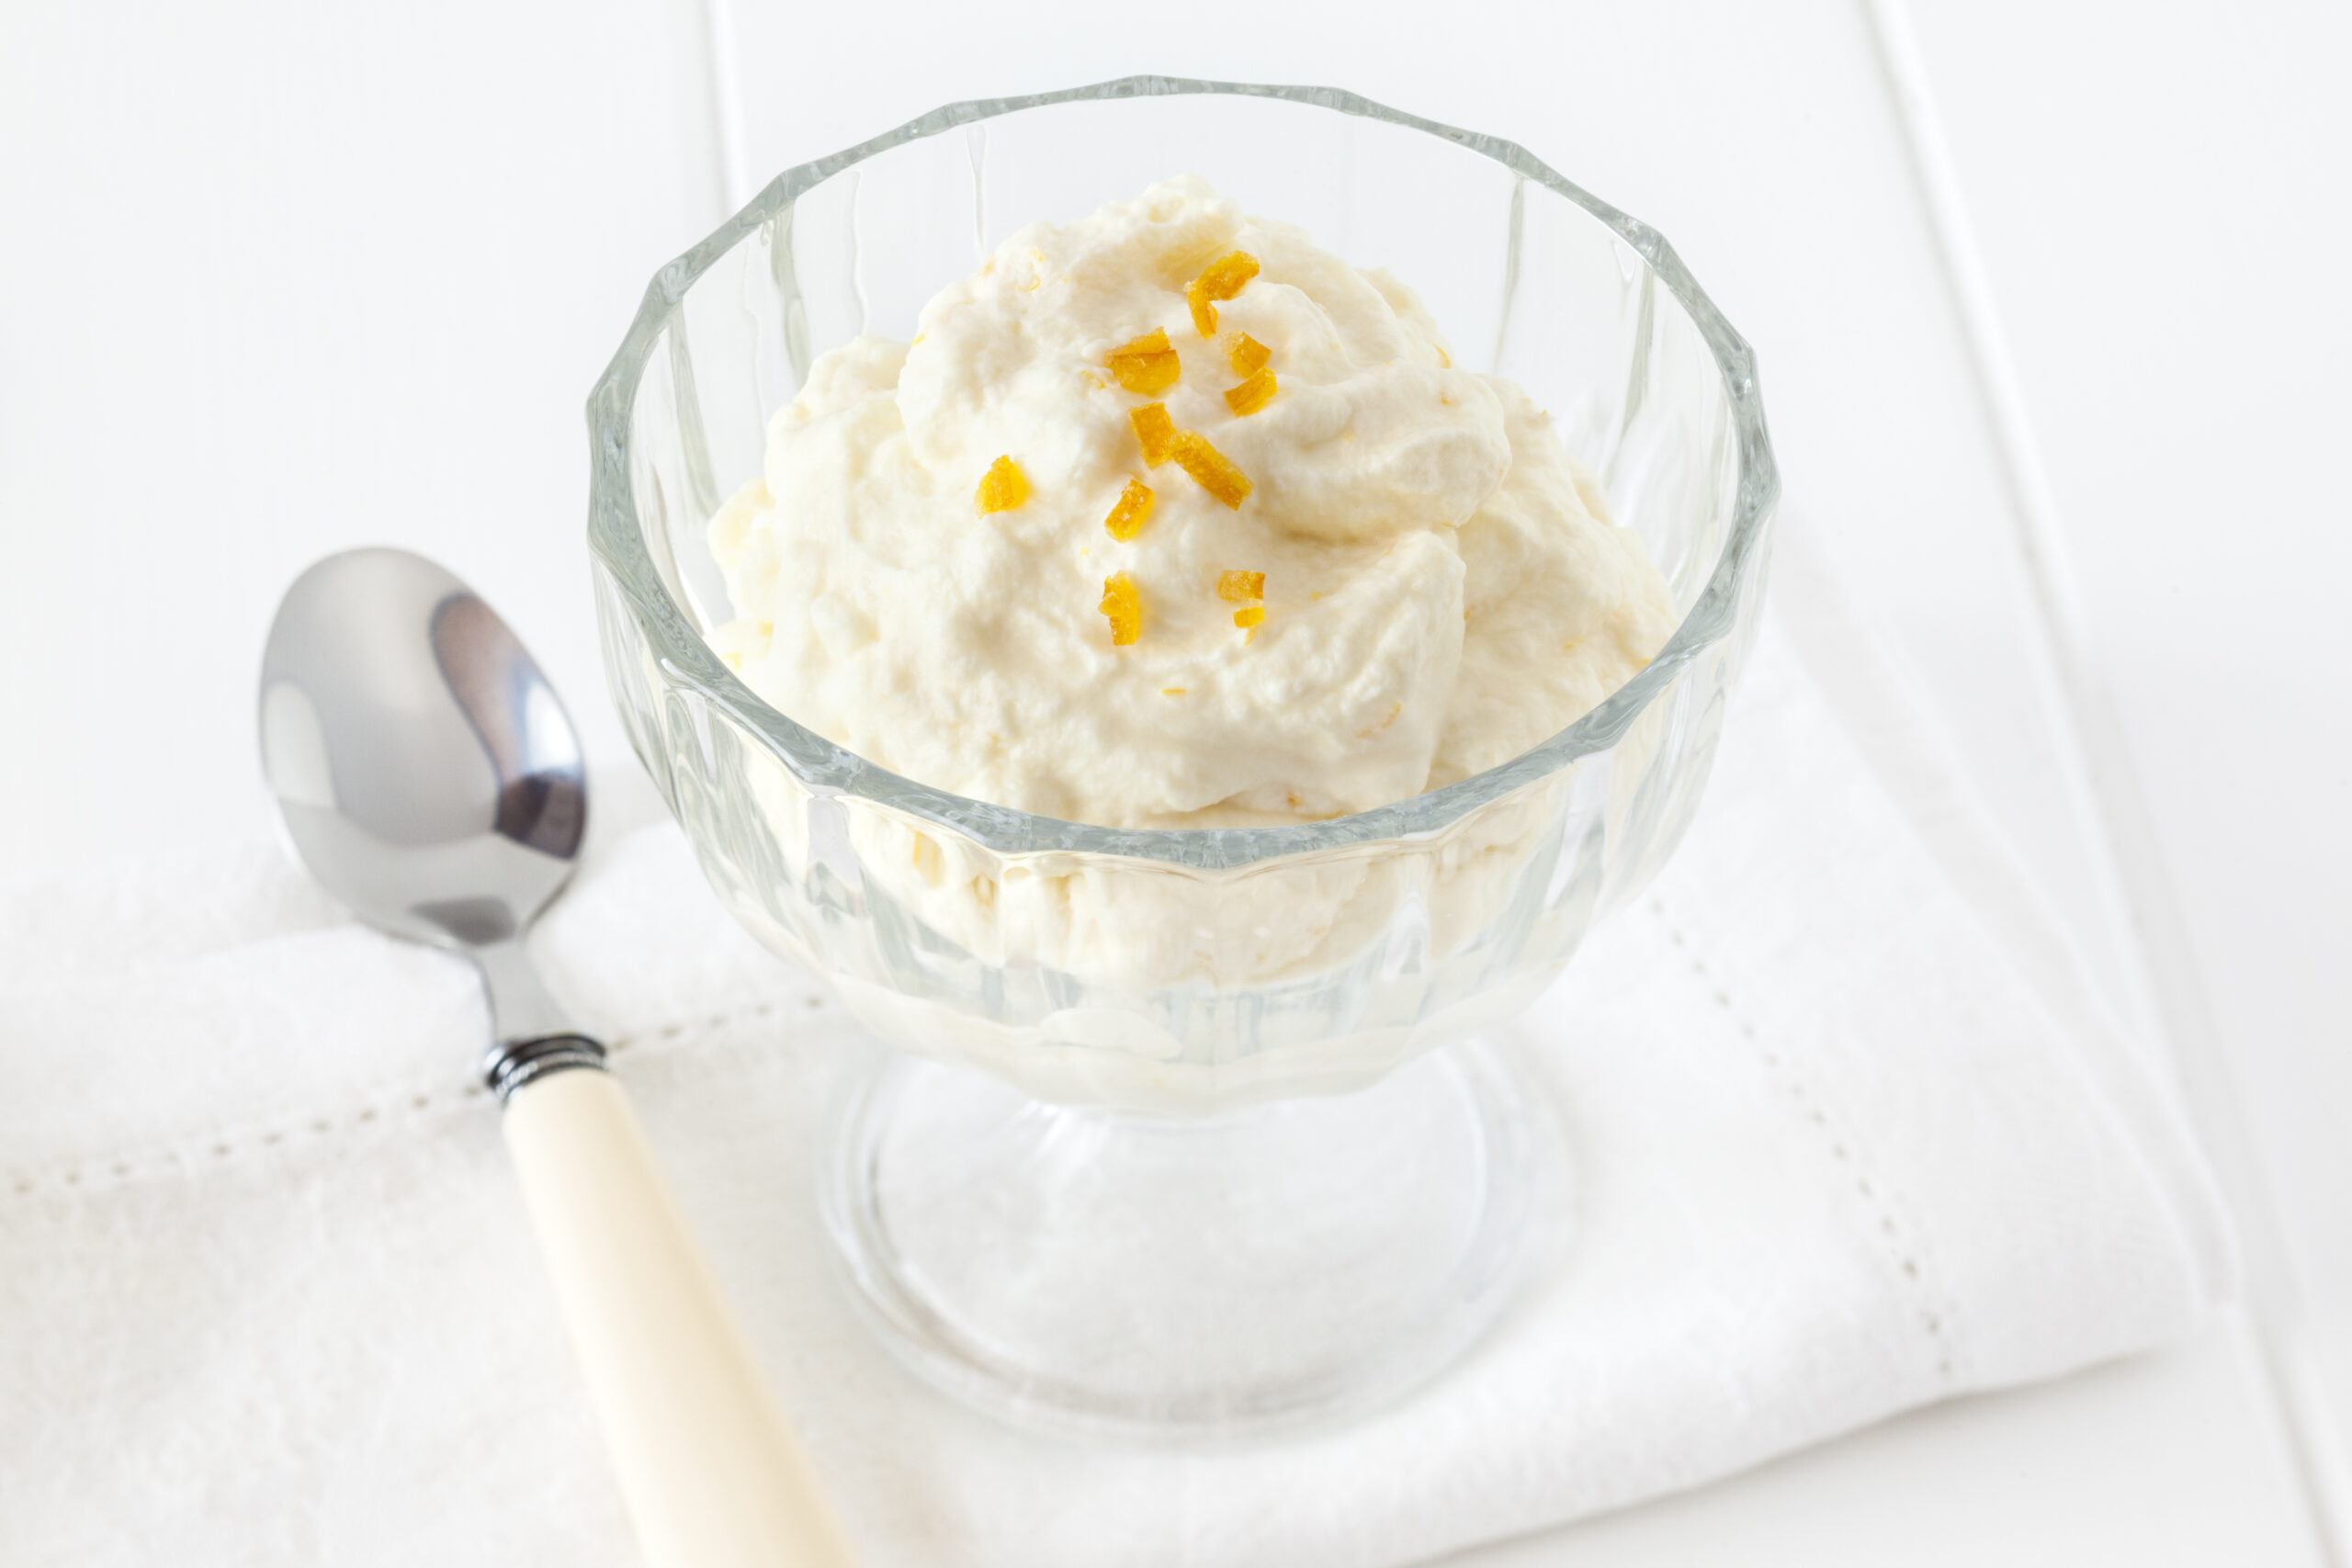 Syllabub - traditional English dessert made from whipped cream, light rum and flavoured with lemon and orange.